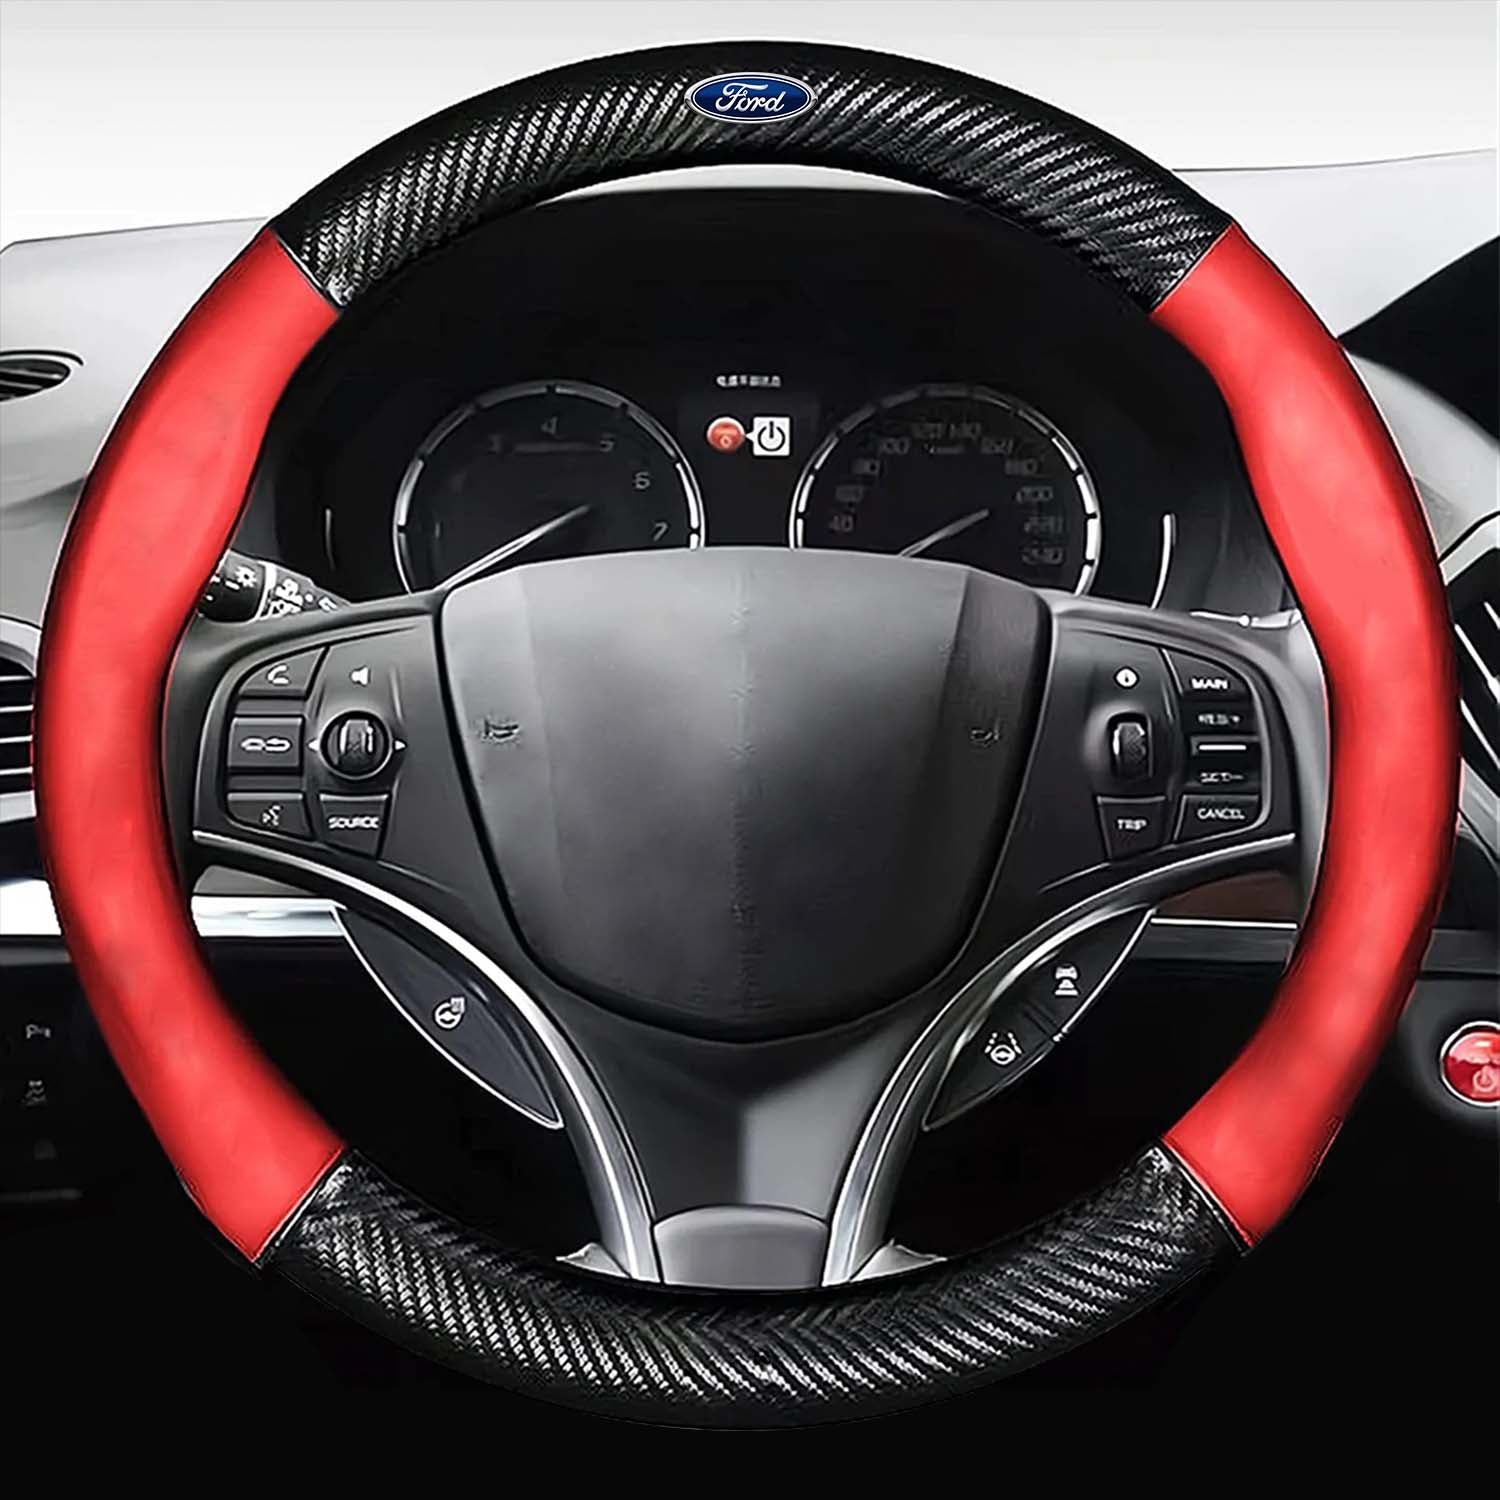 Enhance Your Ride with a Stylish Ford Steering Wheel Cover